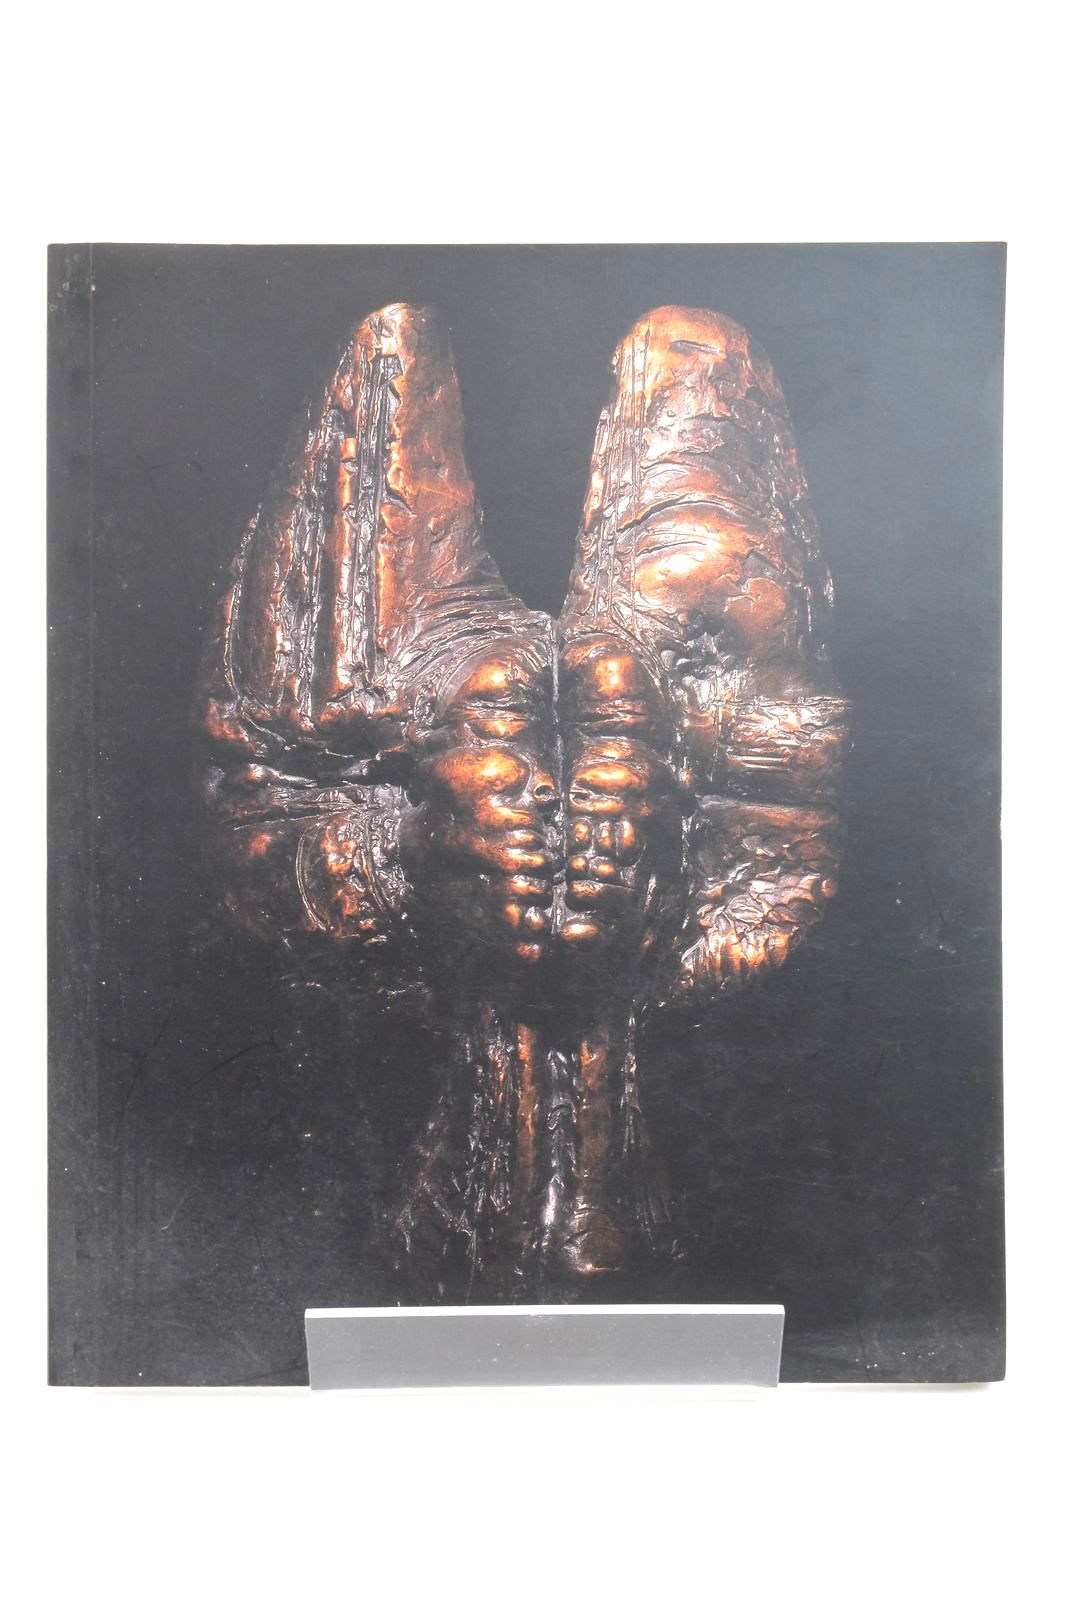 Photo of 'VITALISM': BRITISH SCULPTURES OF THE '50S written by Kingdon, Rungwe illustrated by Butler, Reg Fullard, George Chadwick, Lynn et al.,  published by Gallery Pangolin (STOCK CODE: 2136611)  for sale by Stella & Rose's Books